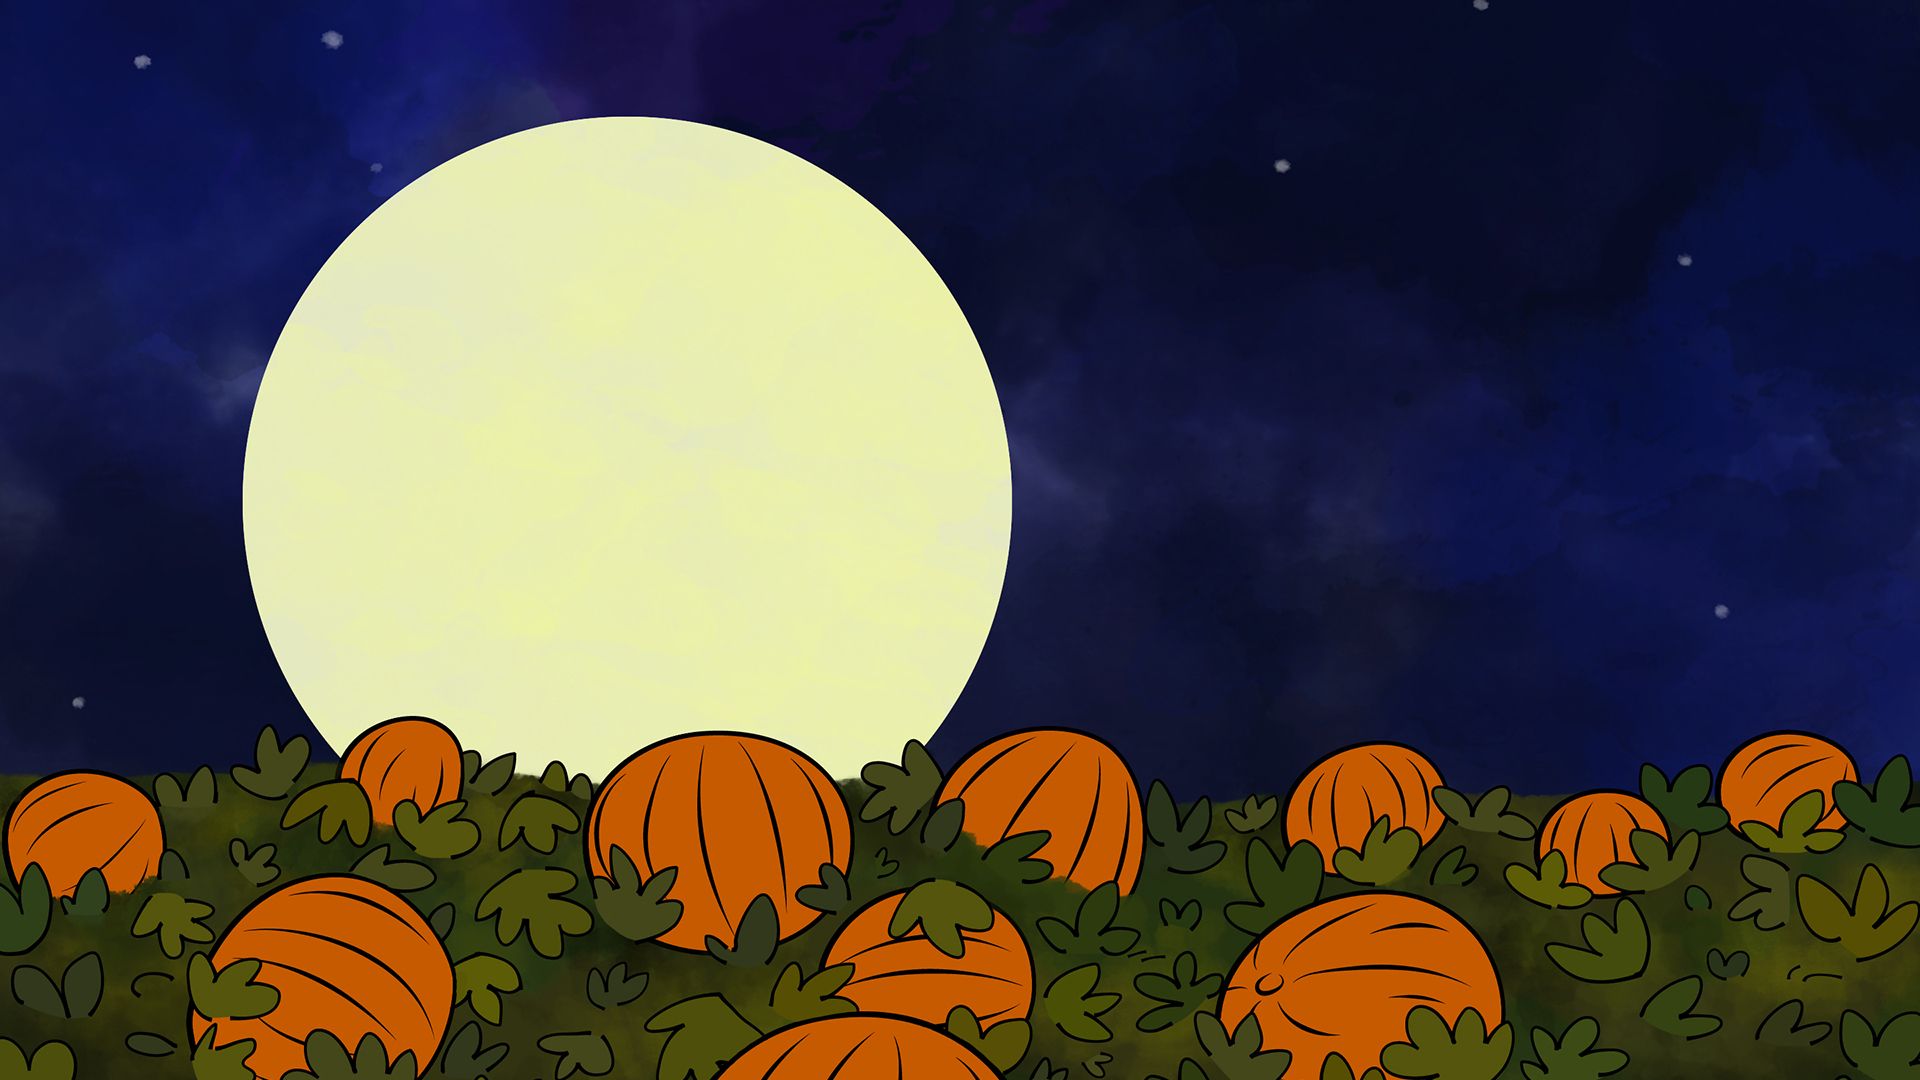 Download Great Pumpkin Charlie Brown Backgrounds Free